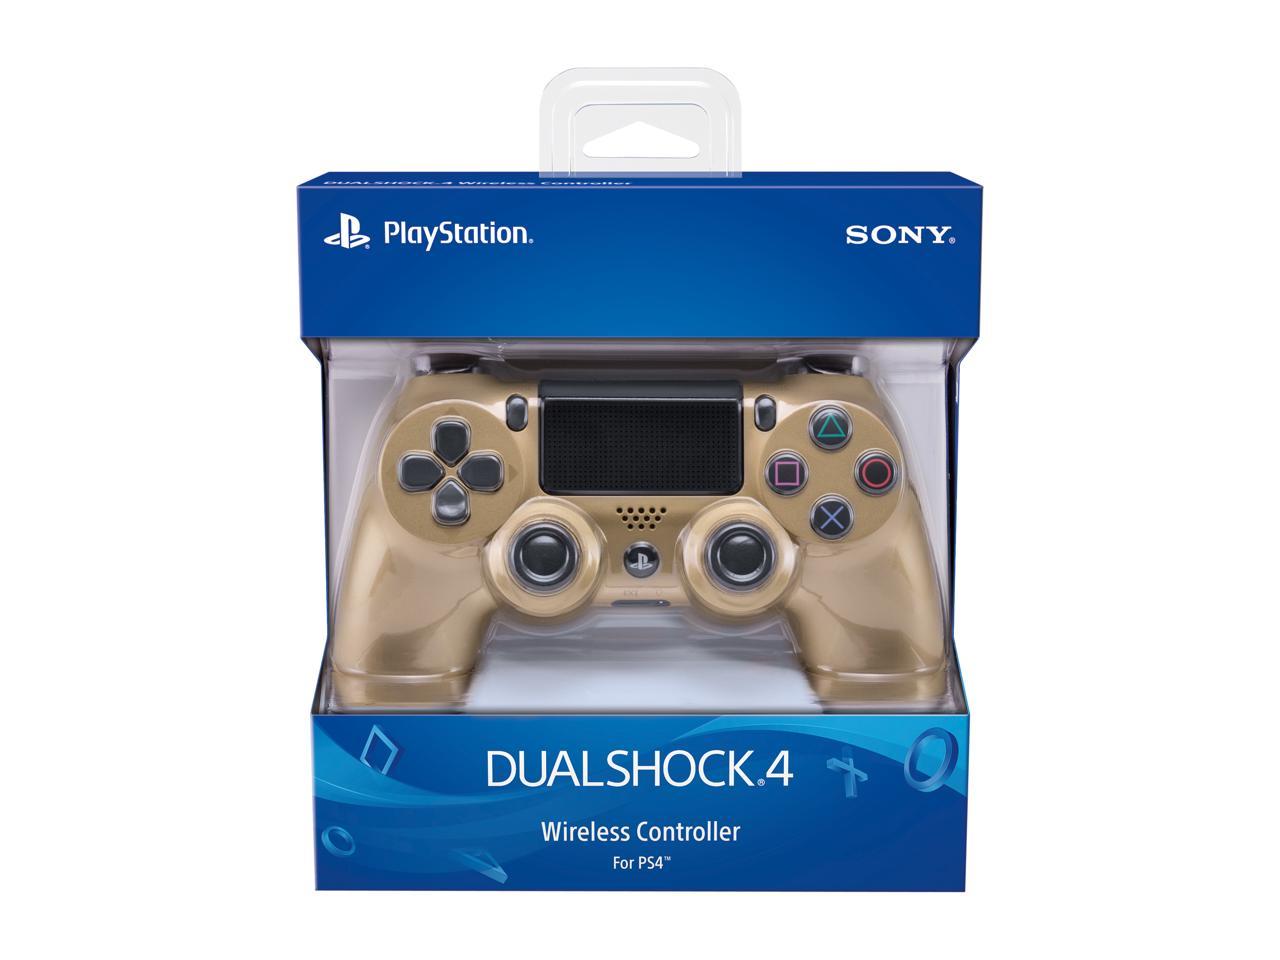 ds4 gold